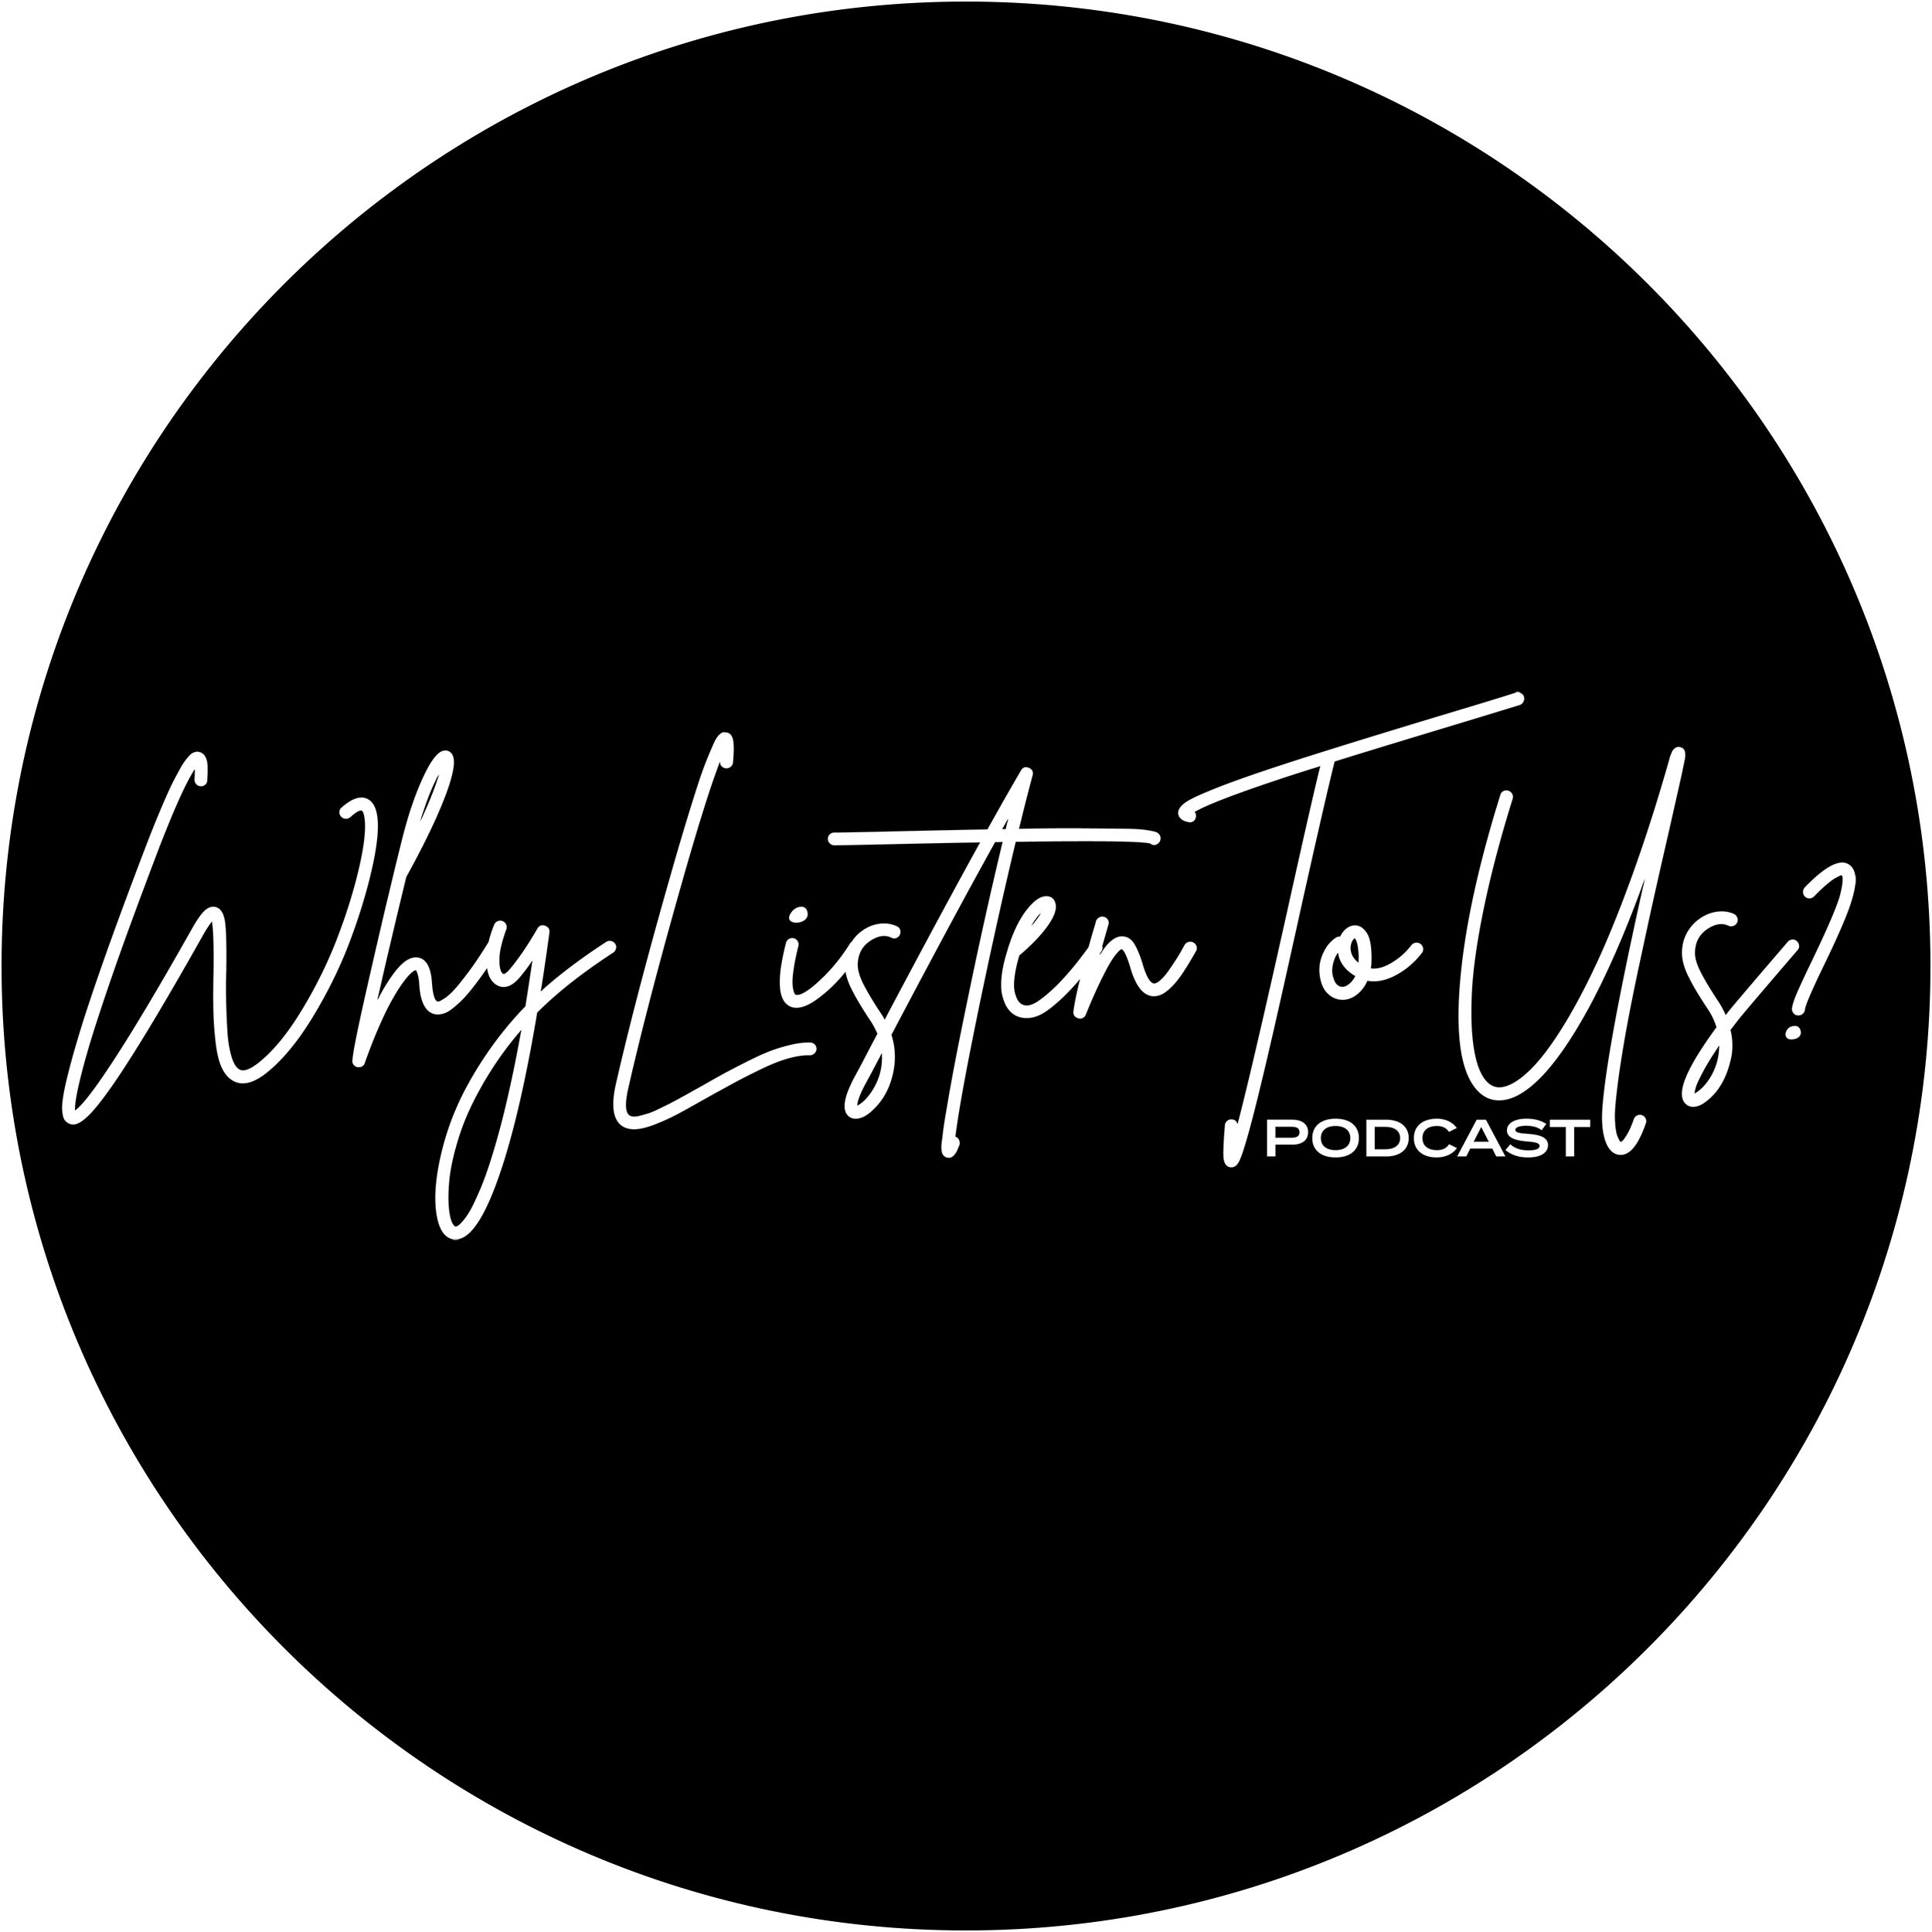 Artwork for podcast Why Listen To Us?